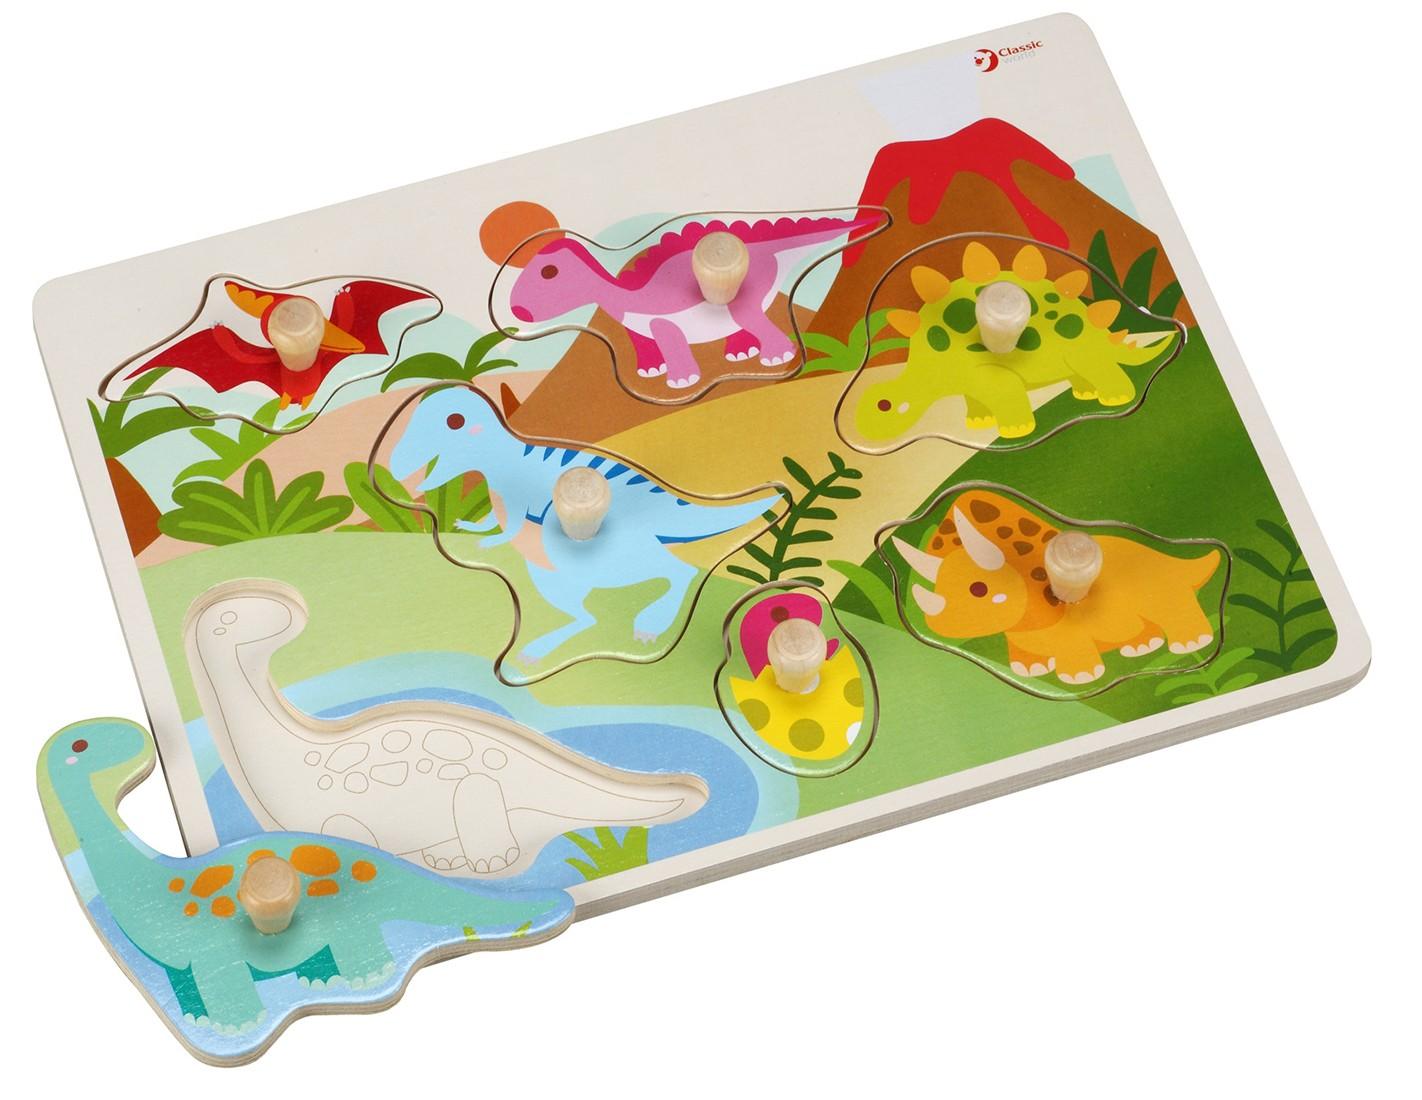 Children's wooden puzzle with figurines - dinosaurs - MoonyBoon